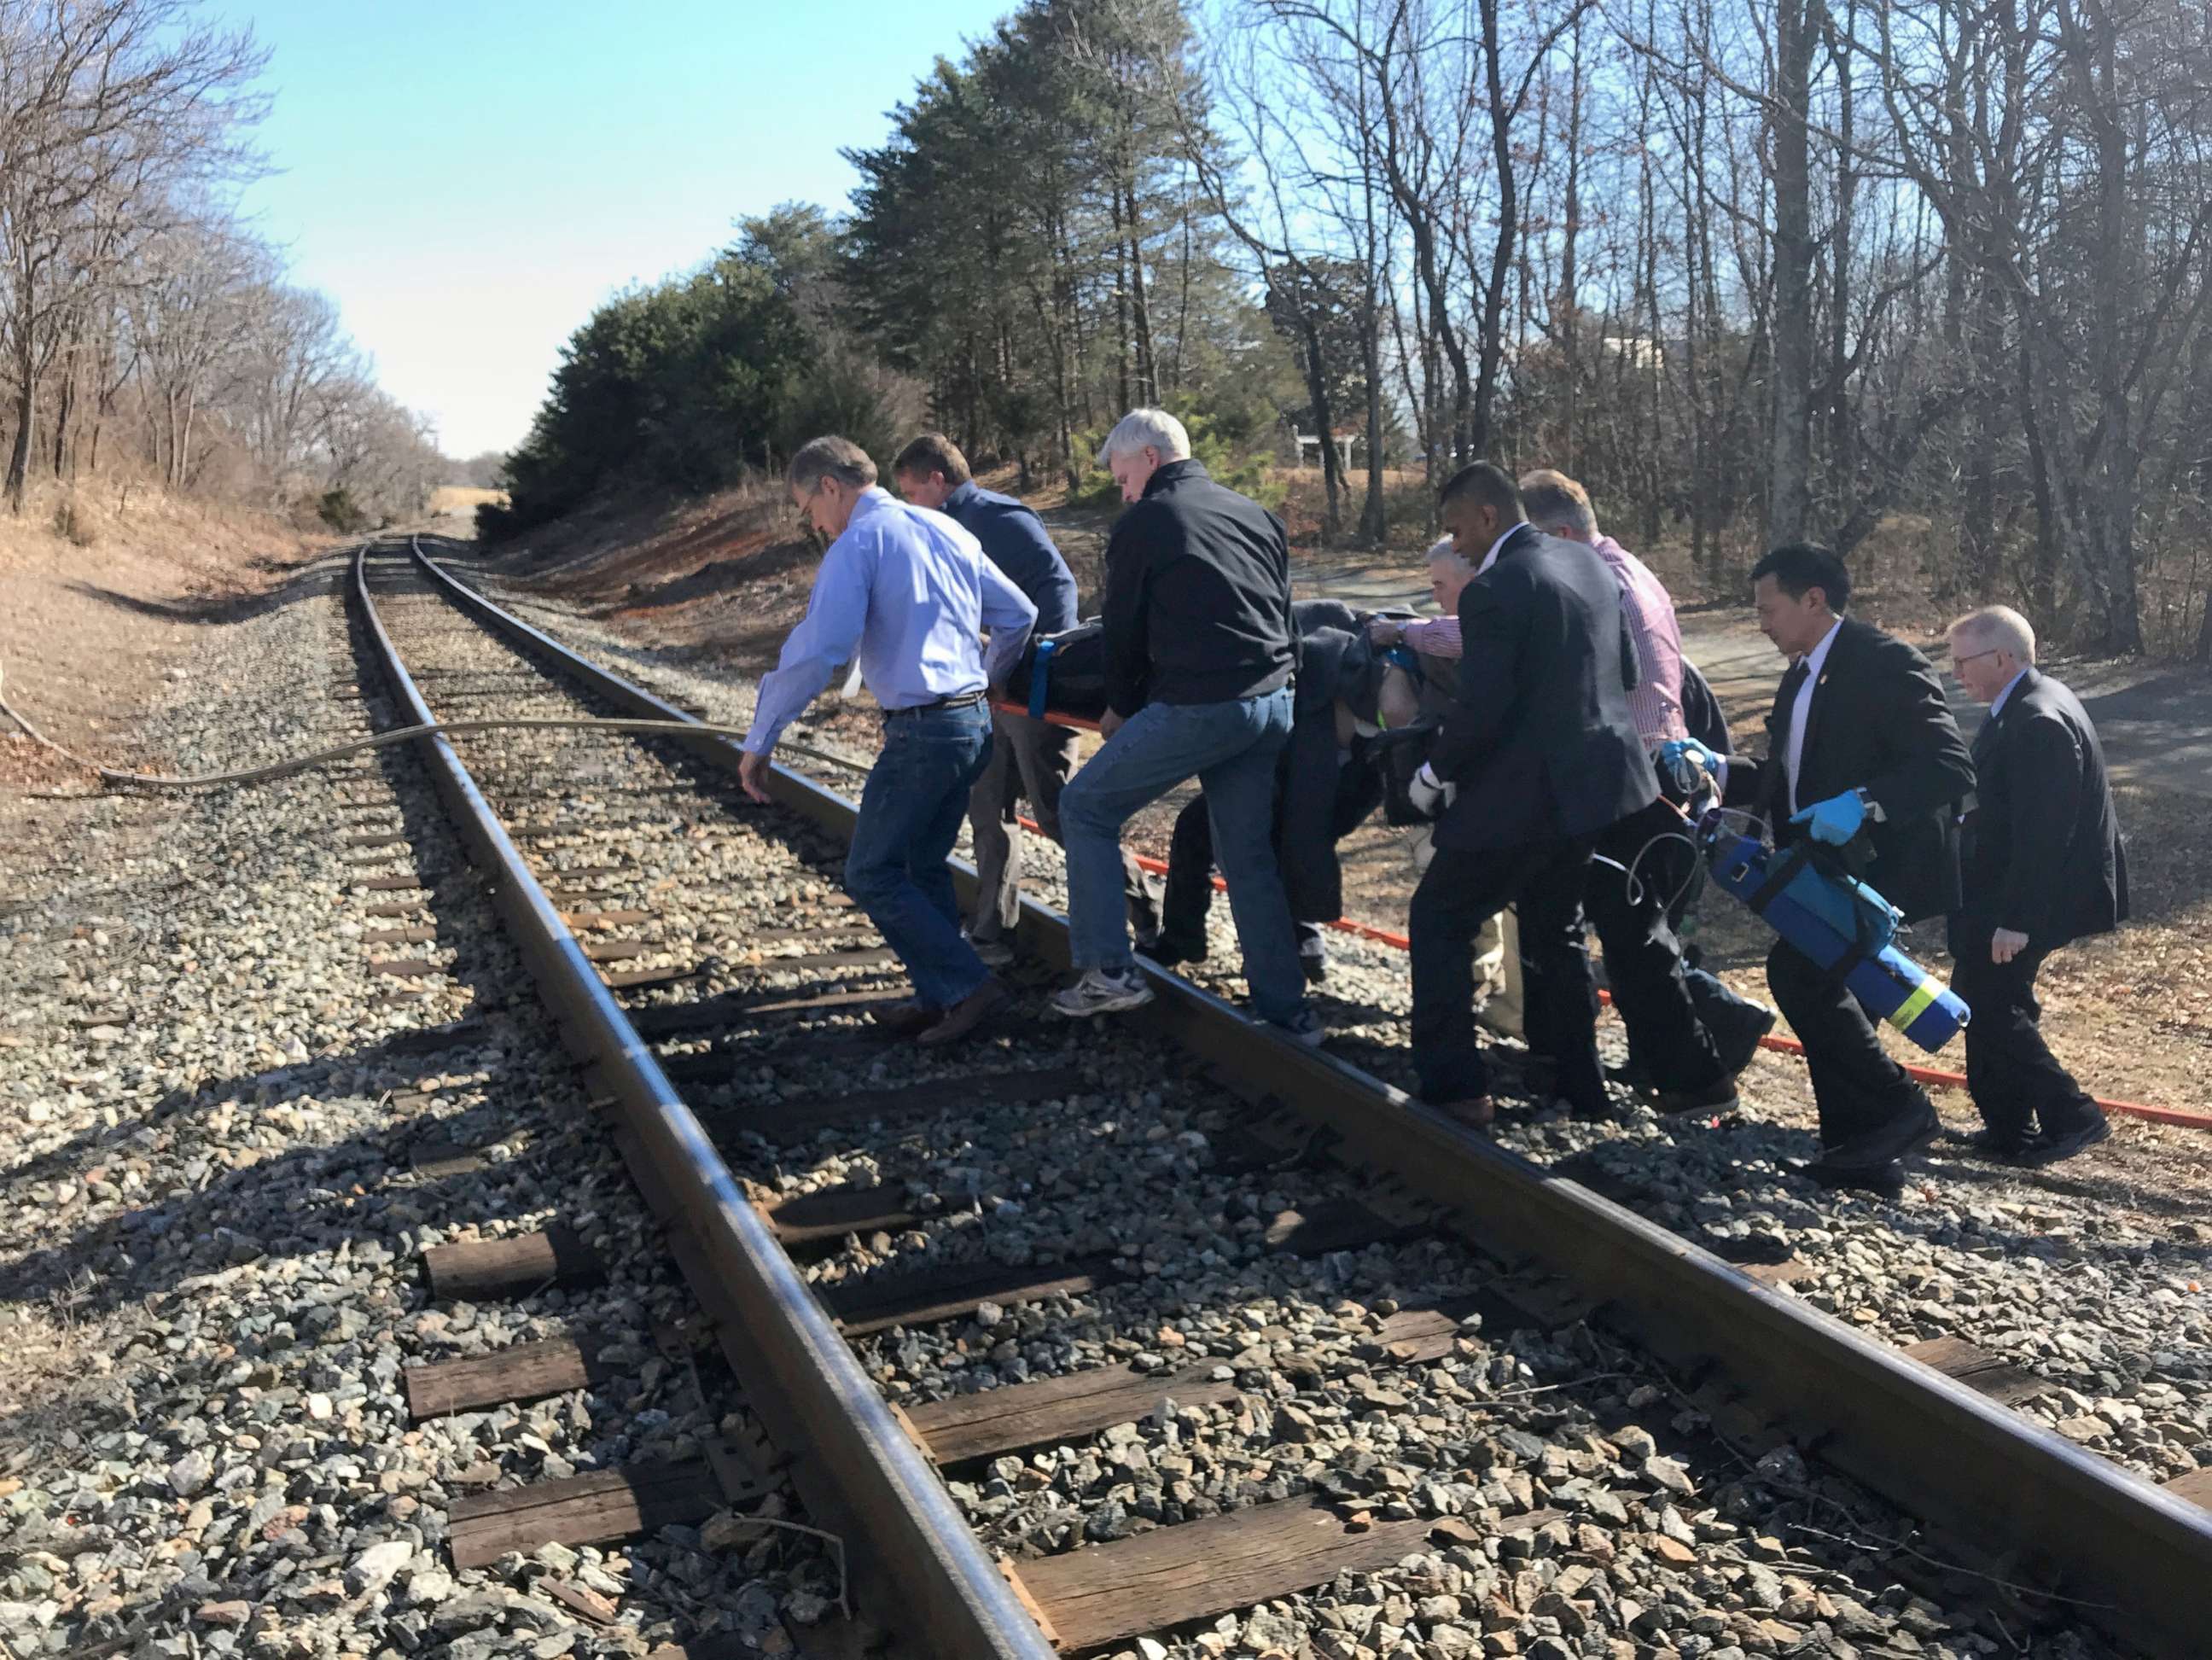 PHOTO: First responders and passengers from an Amtrak passenger train carrying  members of Congress, carry one of the injured to an ambulance after the train collided with a garbage truck in Crozet, Va., Jan. 31, 2018.